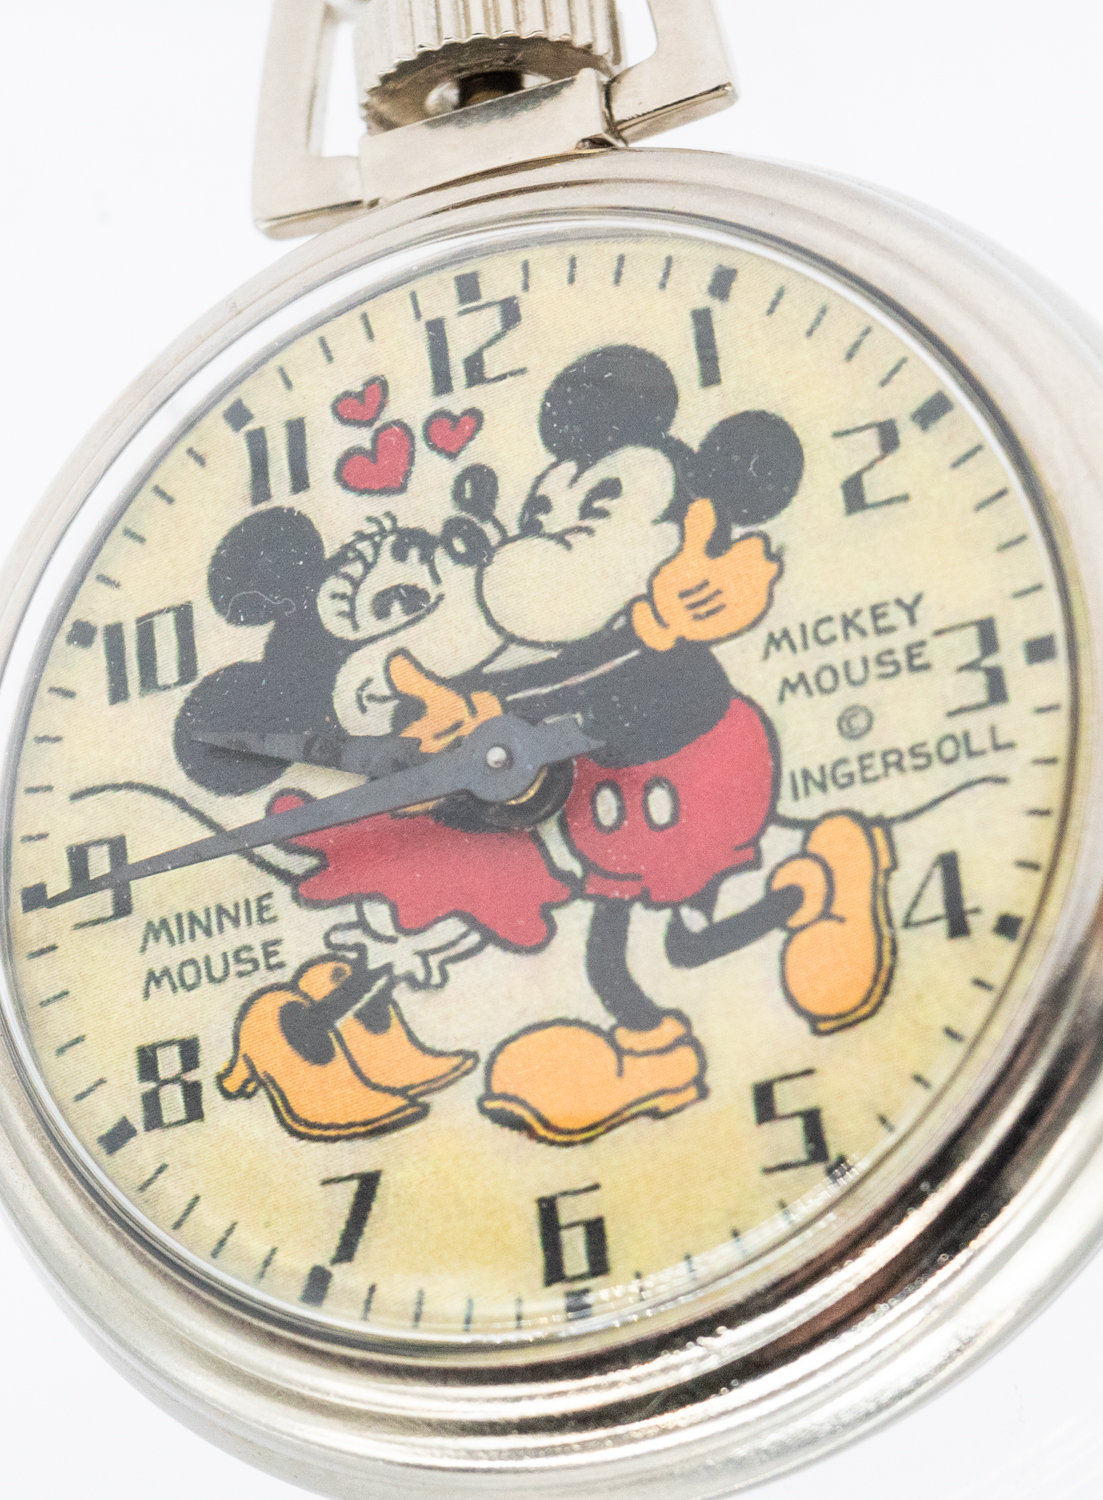 Ingersoll a  'Mickey & Minnie' Mouse automation chrome cased pocket watch, circa 1930's, case approx - Image 3 of 3